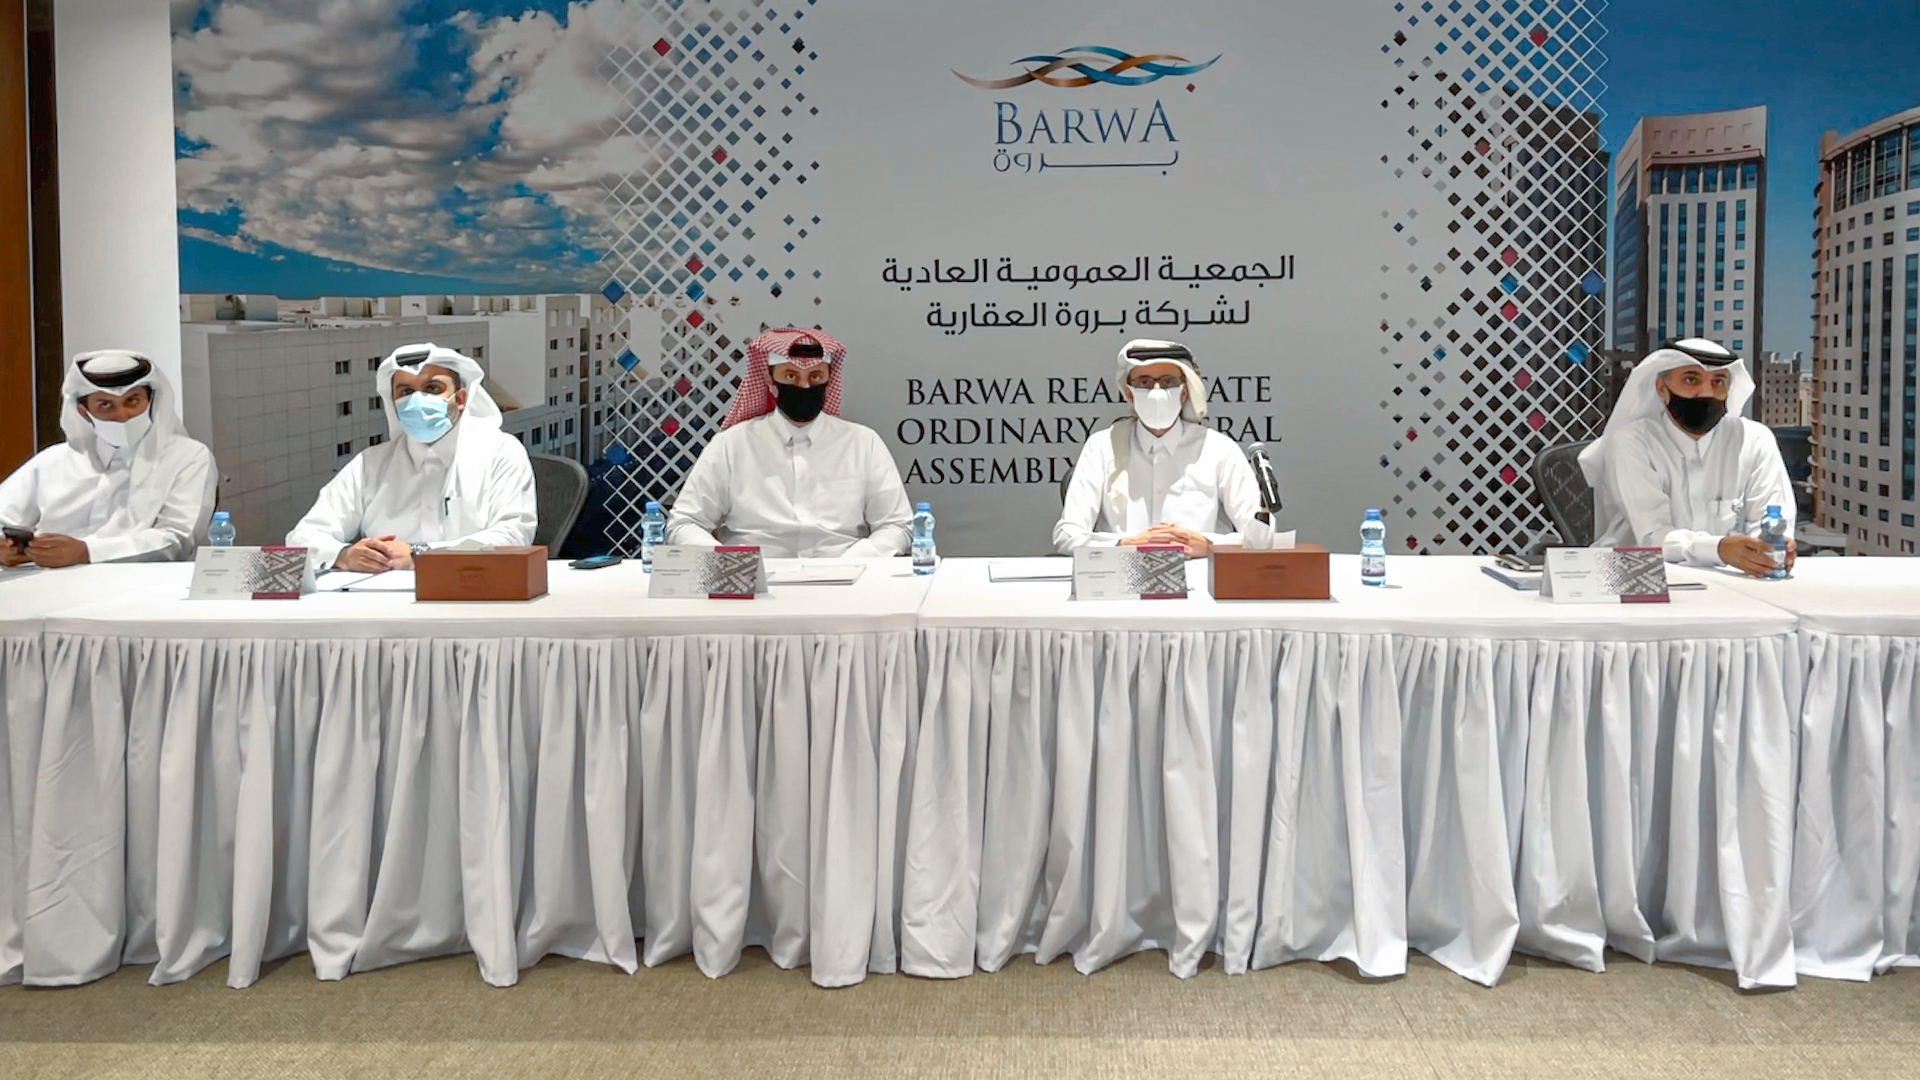 Barwa Real Estate holds its General Assembly remotely